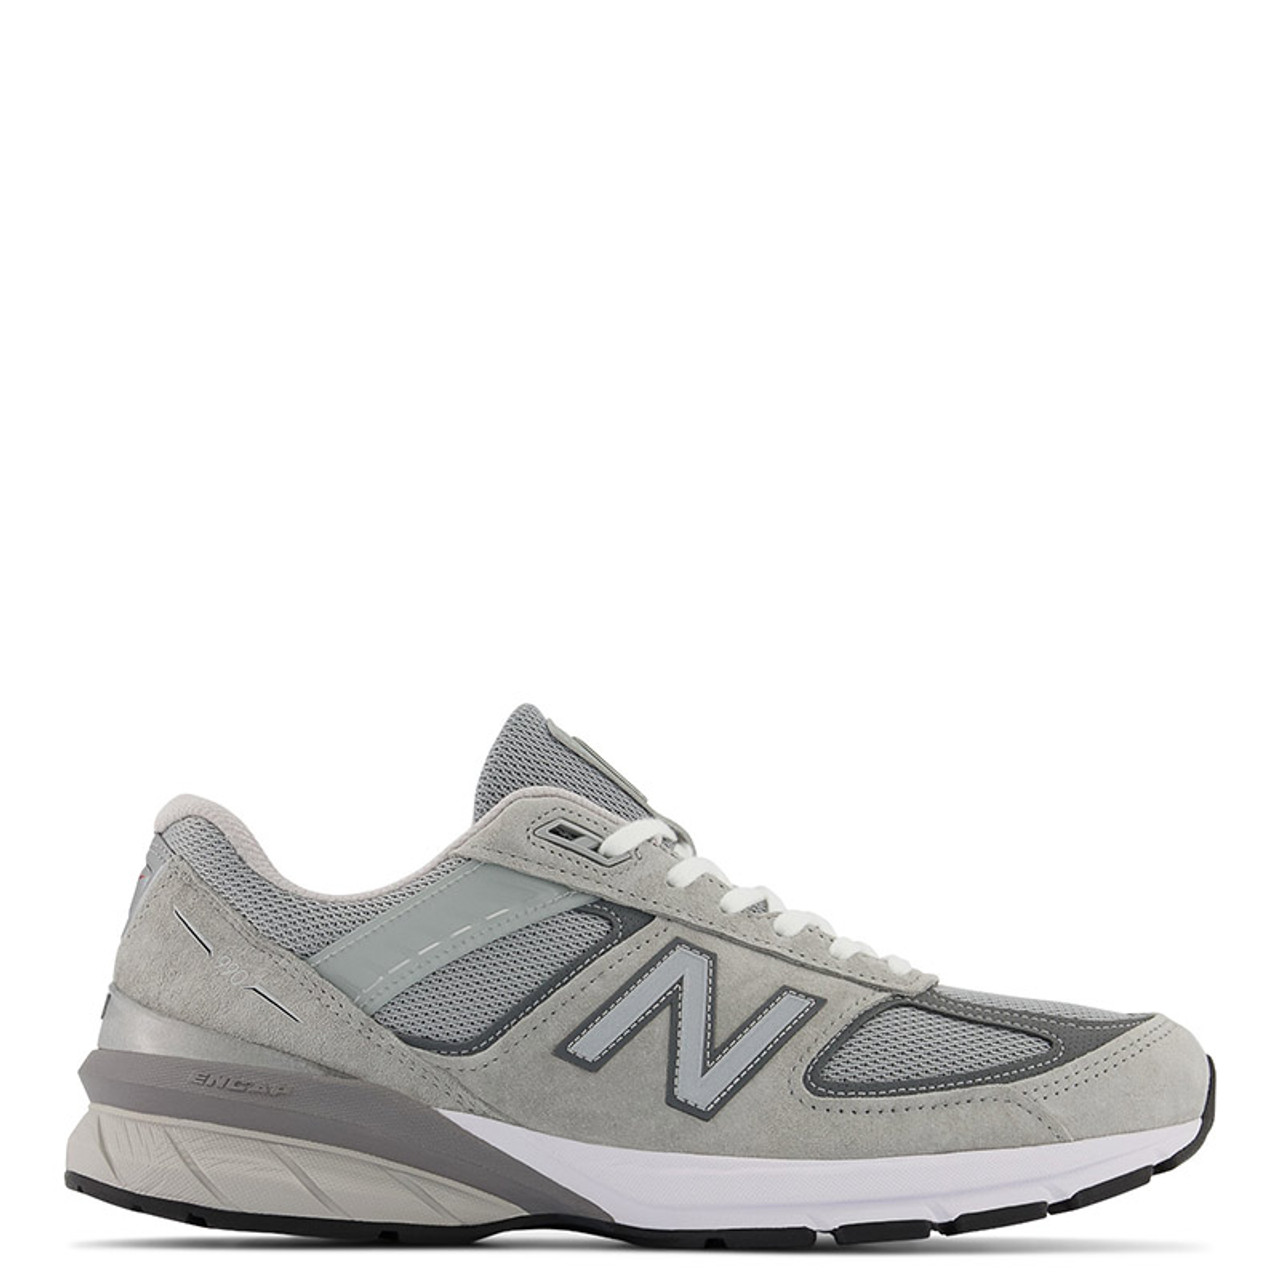 New Balance MADE in USA 990v5 Men's Grey Running Shoes